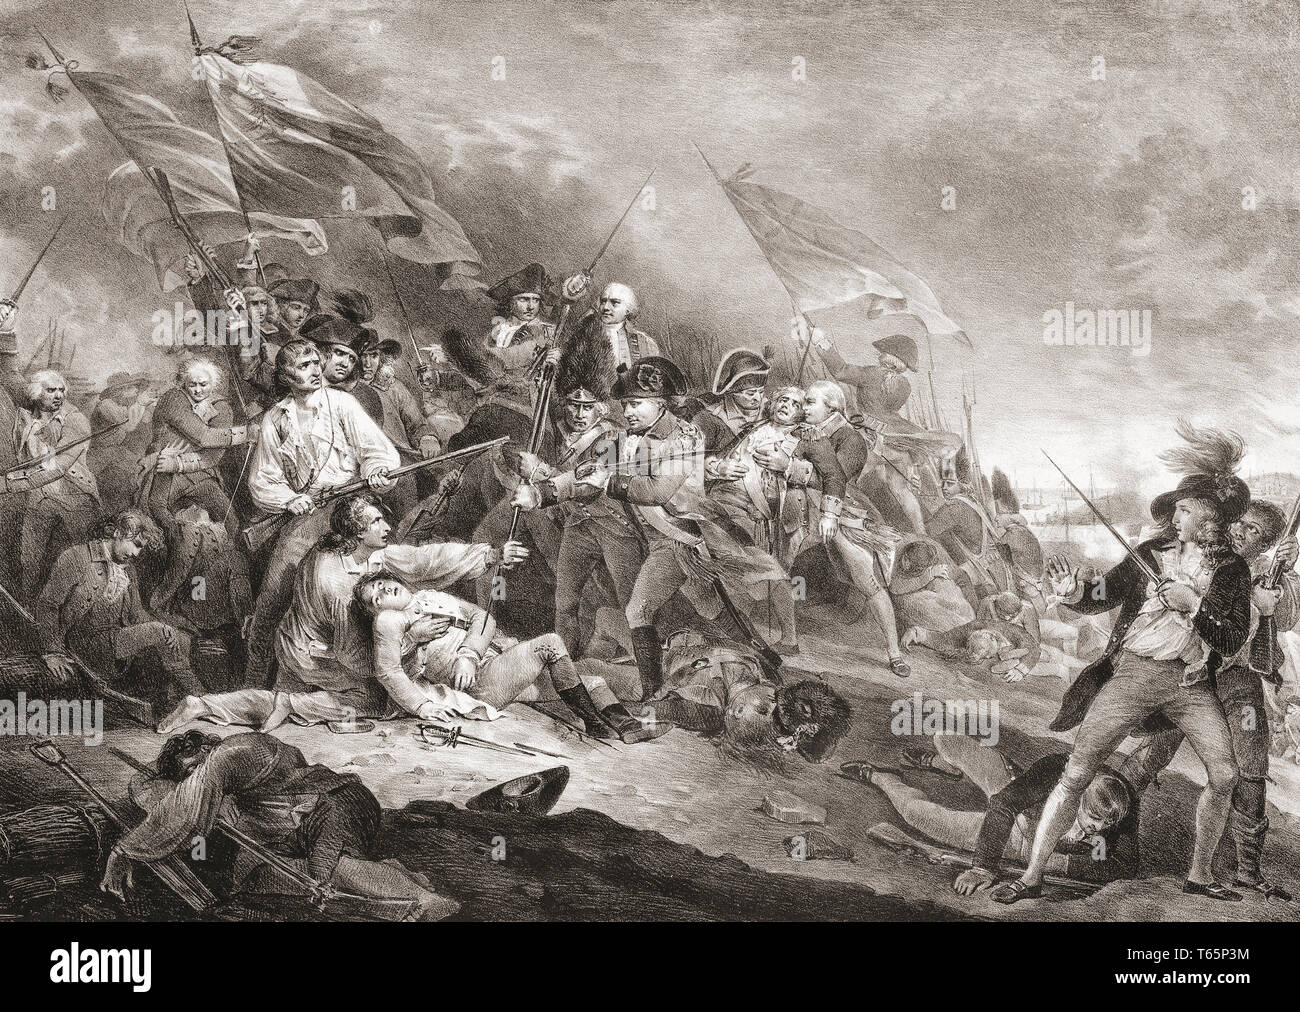 The Death of General Warren at the Battle of Bunker Hill.  19th century engraving after an 18th century painting by John Trumbull. Stock Photo